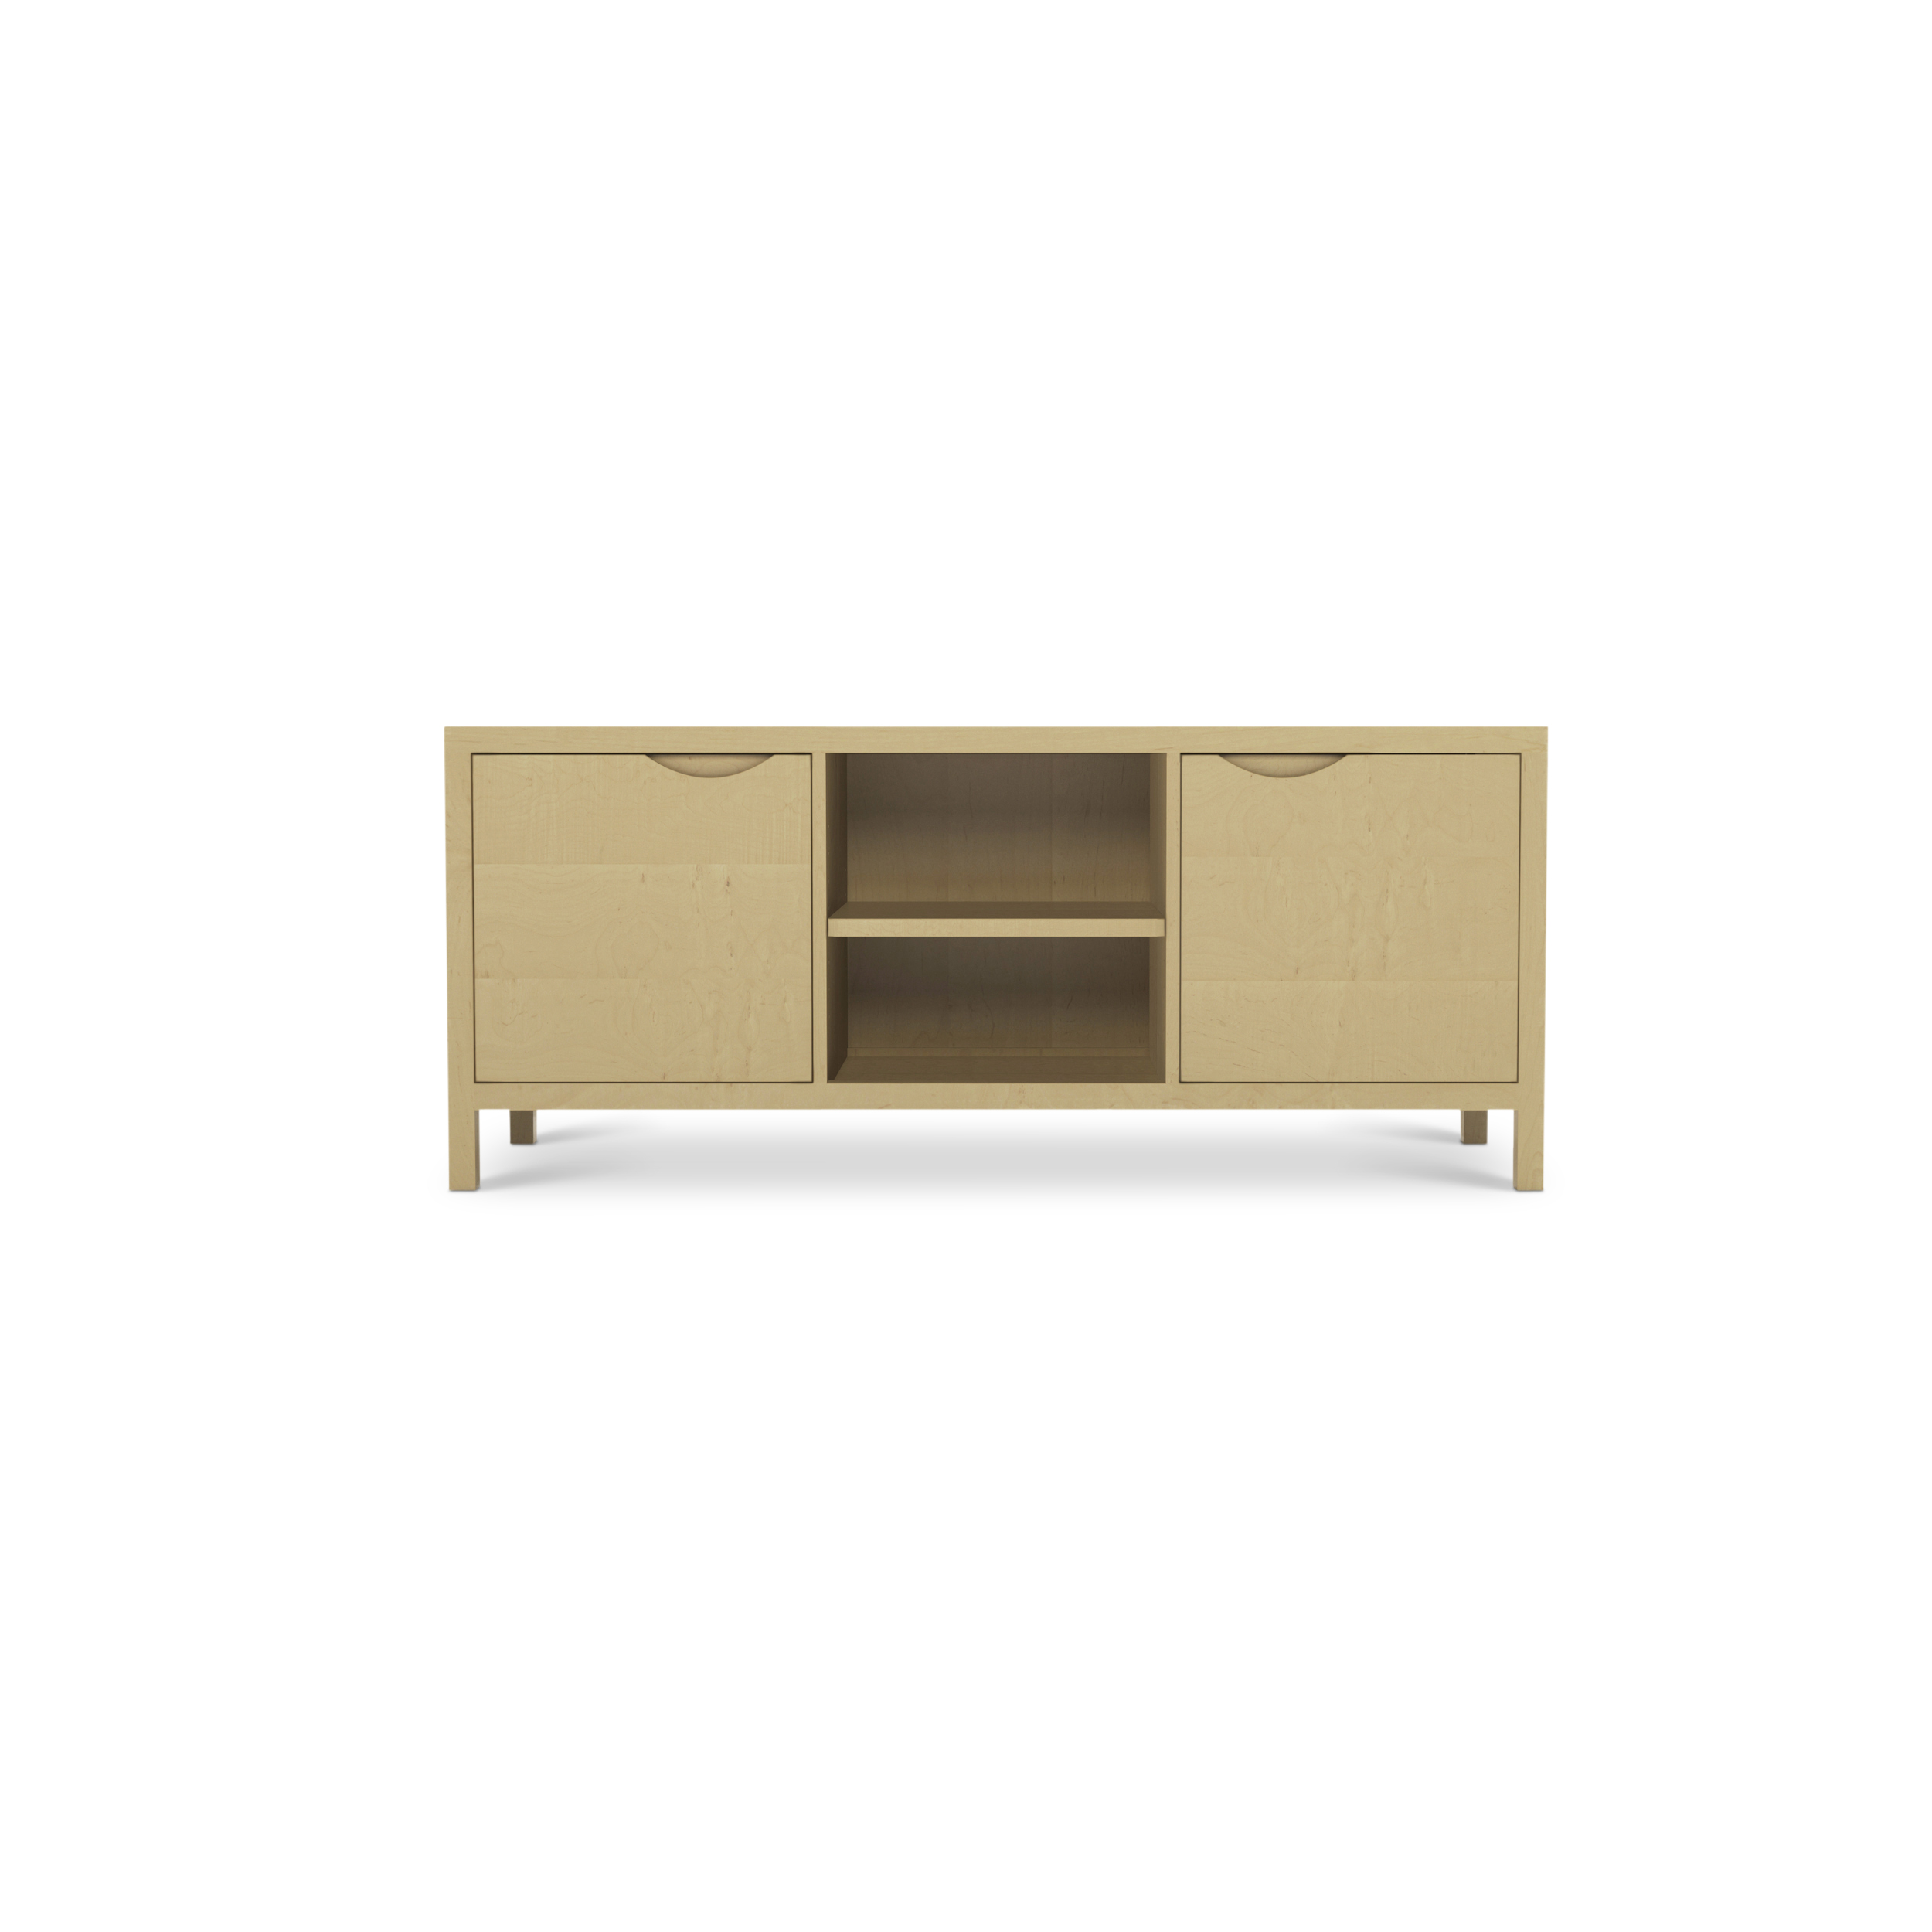 Series 353 Media Console With Two Doors At 60″ In Width